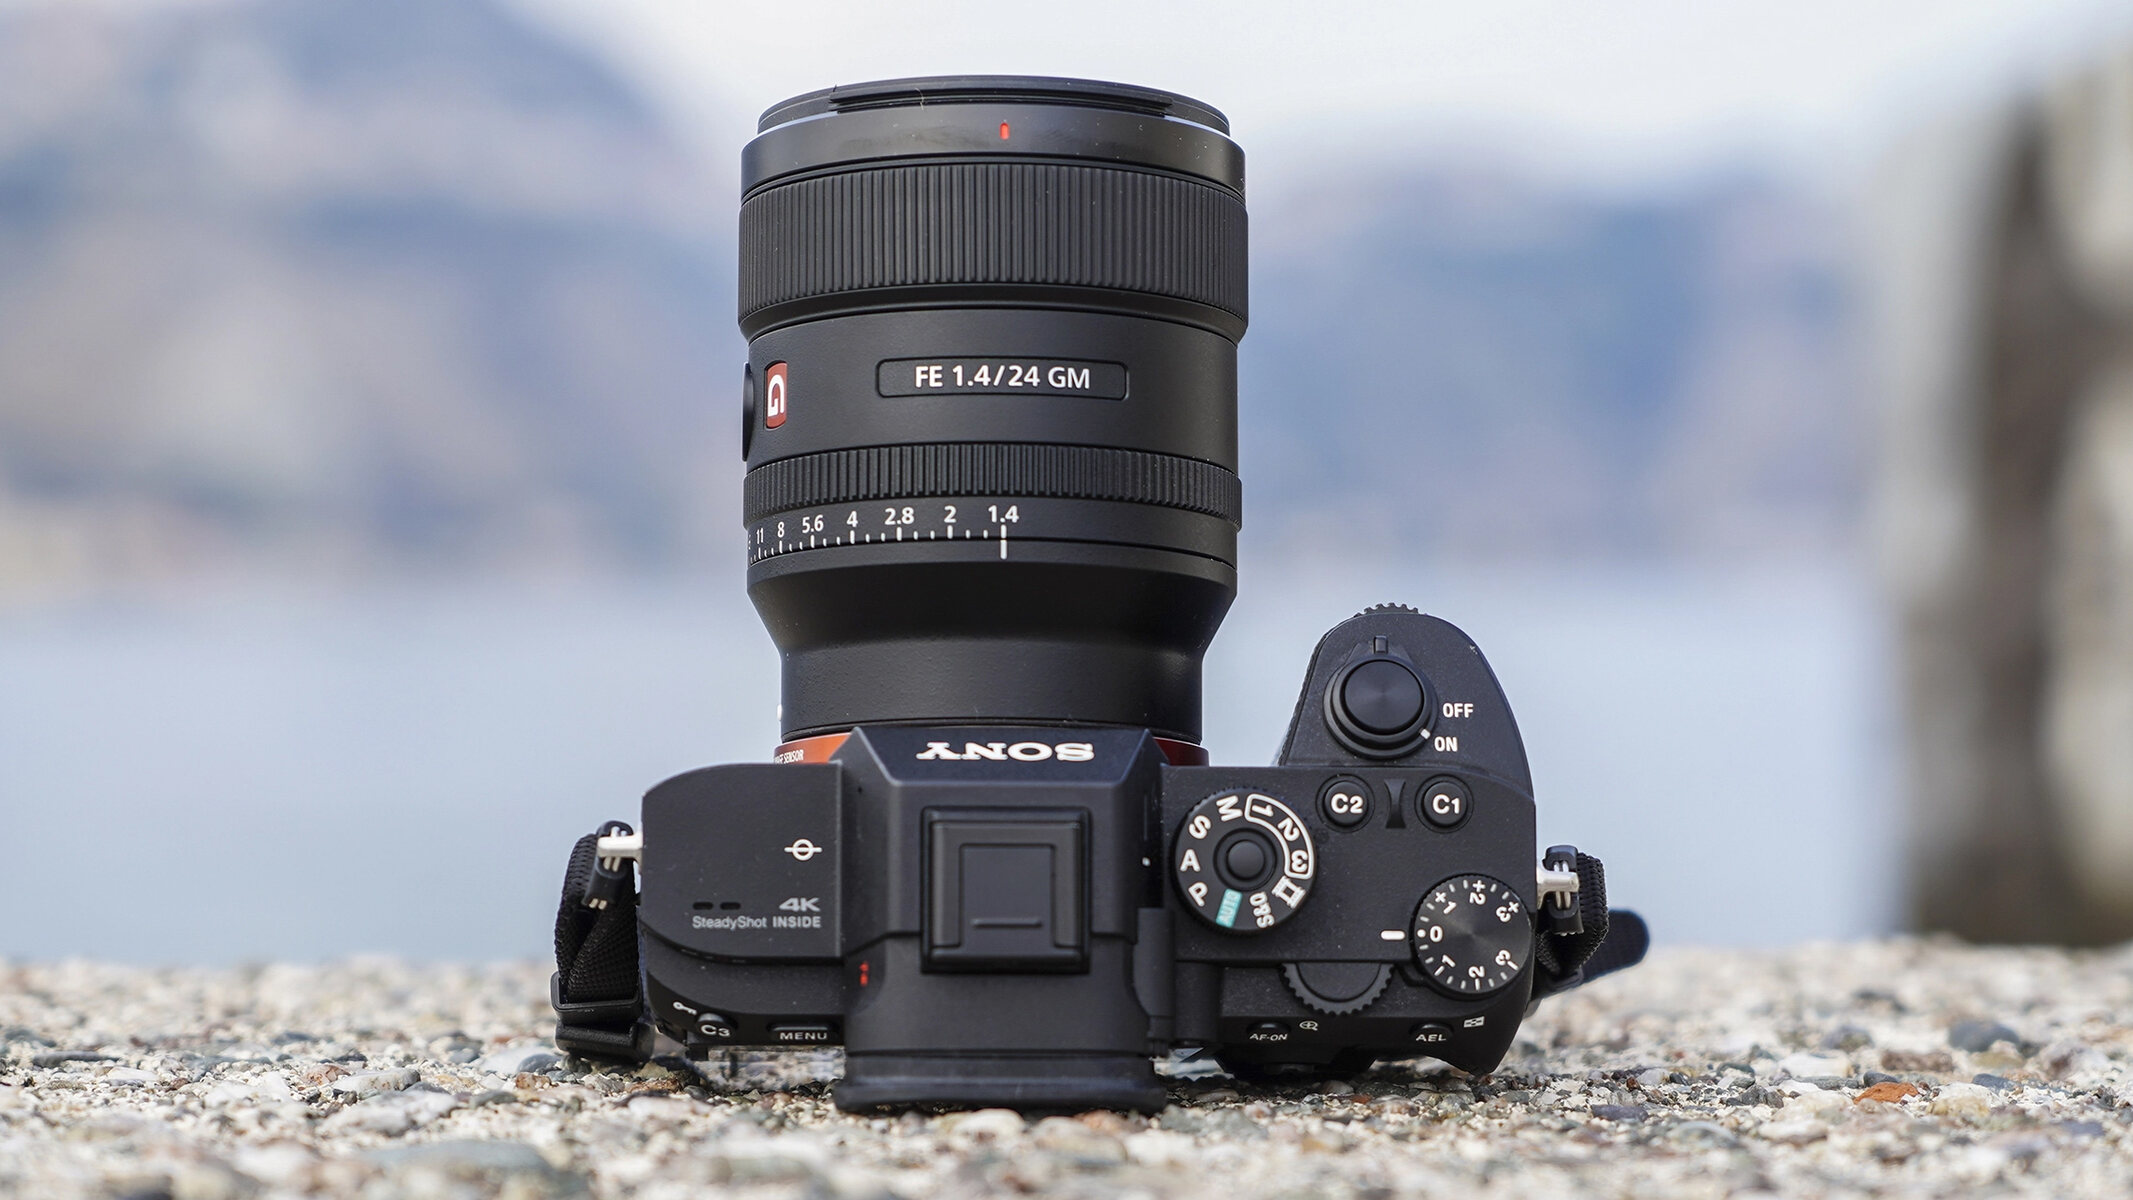 How To Change Aperture On Sony Mirrorless Camera